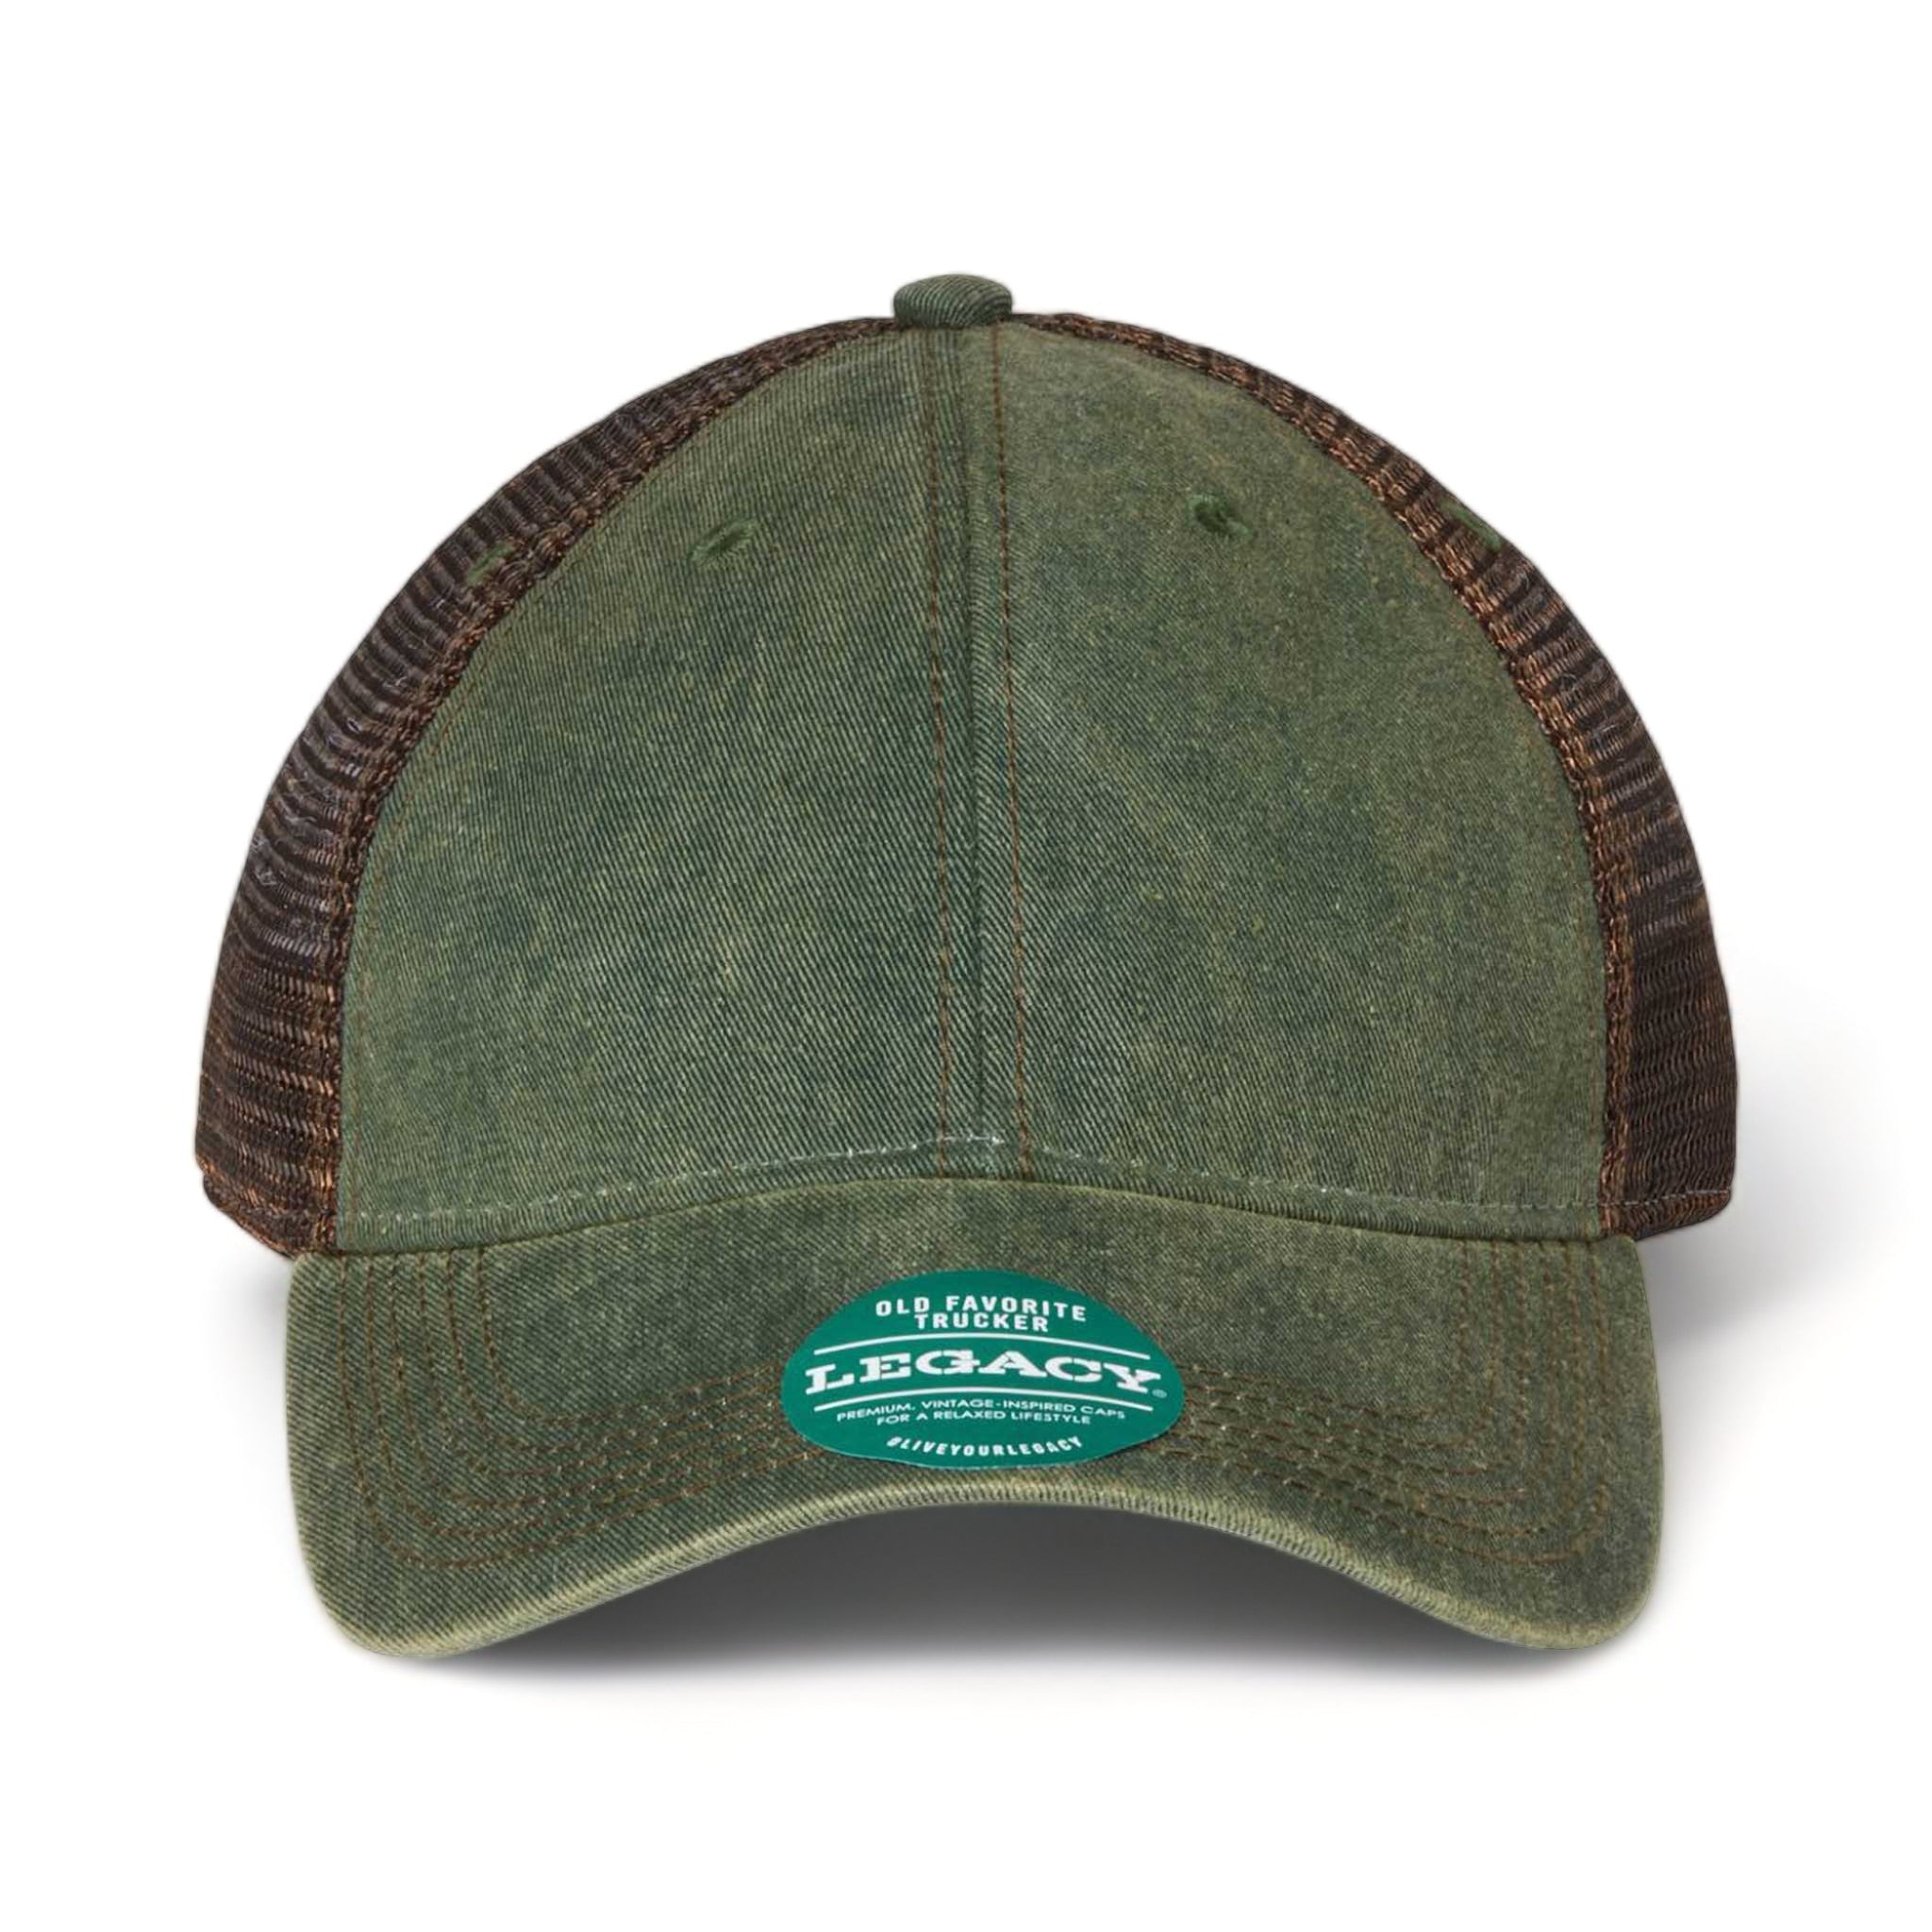 Front view of LEGACY OFA custom hat in green and brown